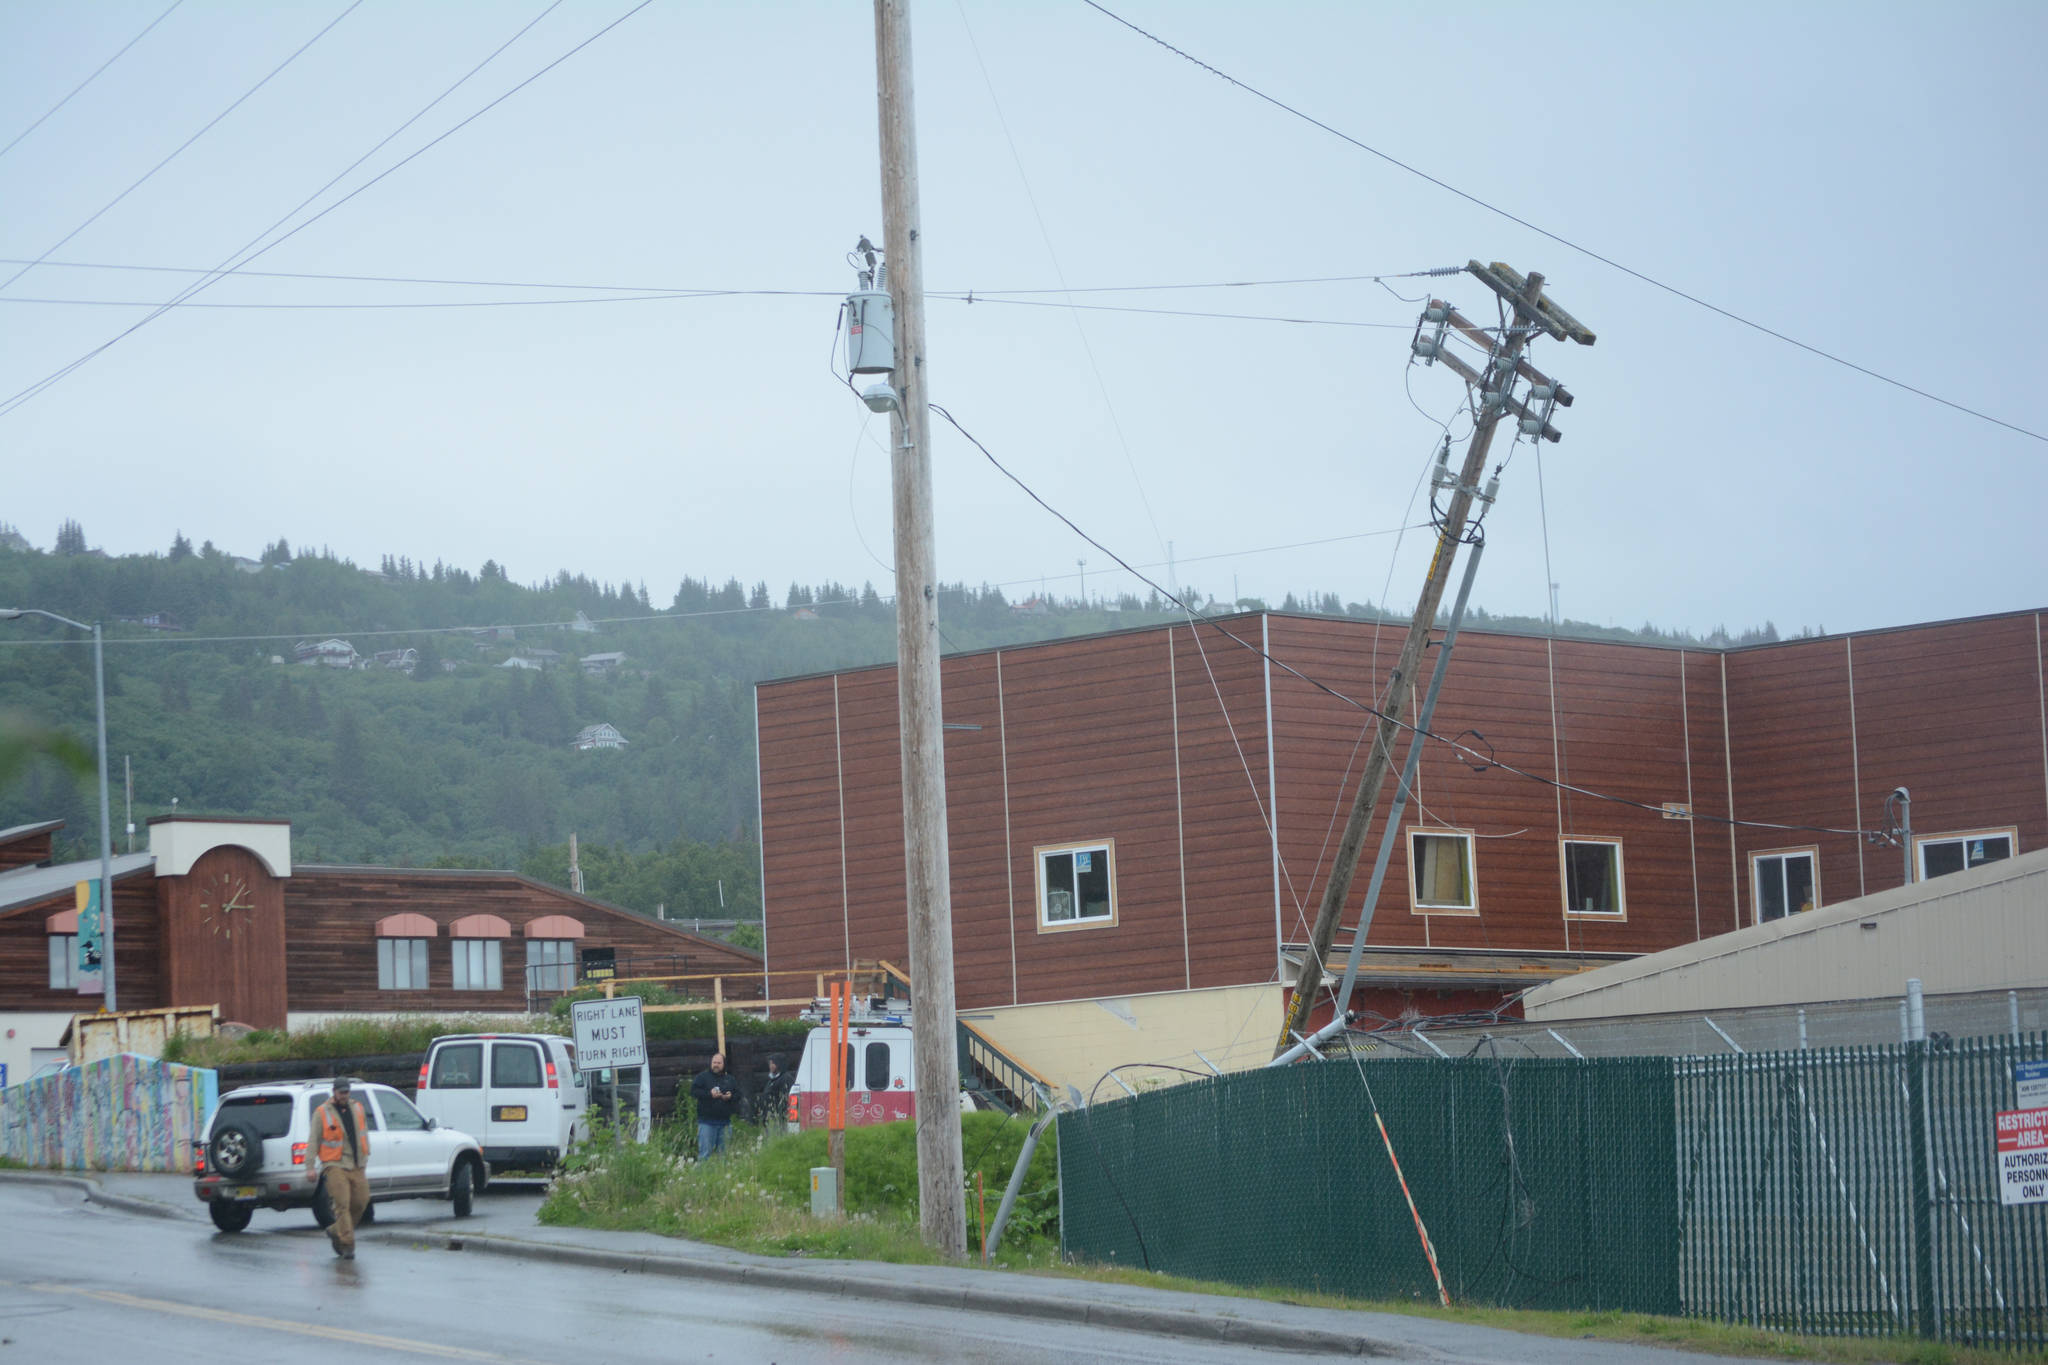 Homer Electric Association crews assess a downed line and pole on Heath Street about 3:15 p.m. Thursday, June 21. An HEA truck snagged a low-hanging telephone line, breaking a pole and bringing down a power line. The outage affected about 430 customers in downtown Homer. No one was injured in the incident. (Photo by Michael Armstrong / Homer News)